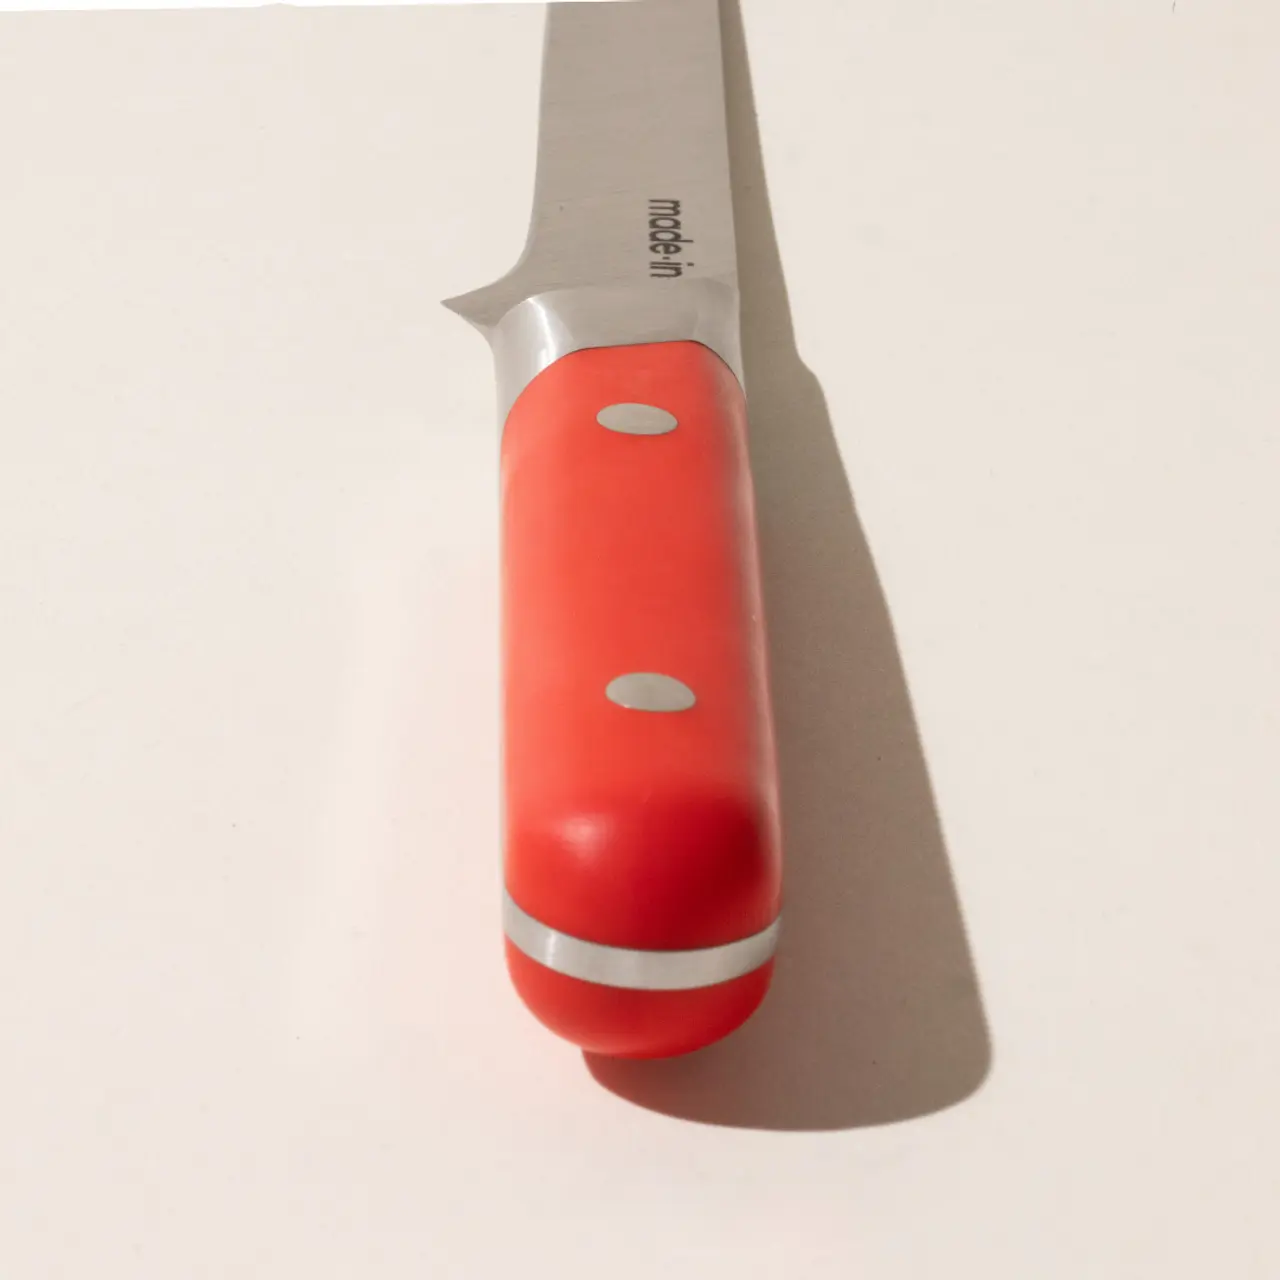 A knife with a red handle lies on a plain surface, casting a slight shadow.